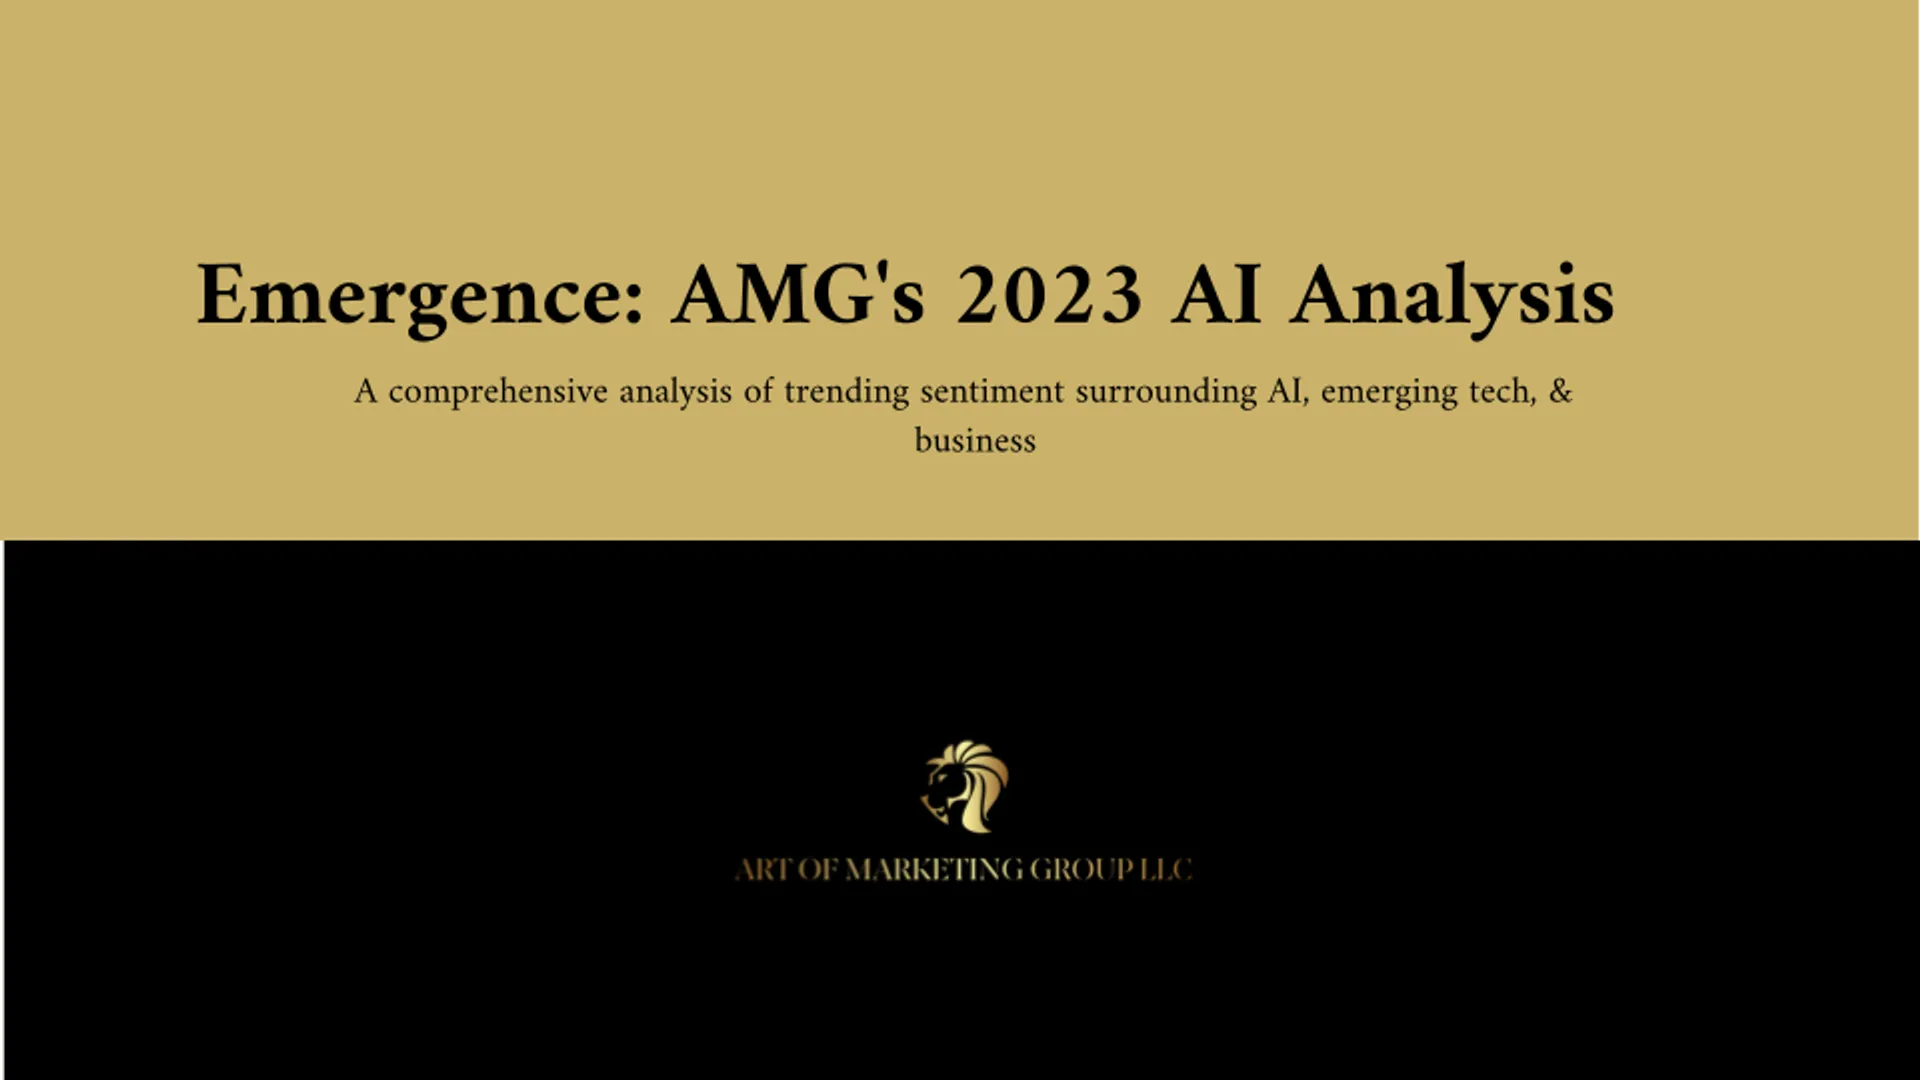 As we begin rounding out Q3 of the year, the release of "Art of Marketing Group's 2023 AI Analysis" is here & can be viewed via our website- https://www.artofmarketinggroup.com/. In this analysis we cover insights from the world of M&A, regulatory trends & developments, consumer sentiment, press coverage trends, & more emerging technologies from global leaders. 

Thank you to those supporting our continued growth within the industry as go-to experts on streamlining integration of these technologies. If you haven't already, subscribe to our Art of Tech Newsletter for weekly installments explaining key technical developments & emerging technologies in layman's terms - https://www.linkedin.com/build-relation/newsletter-follow?entityUrn=7080197287909490688. 